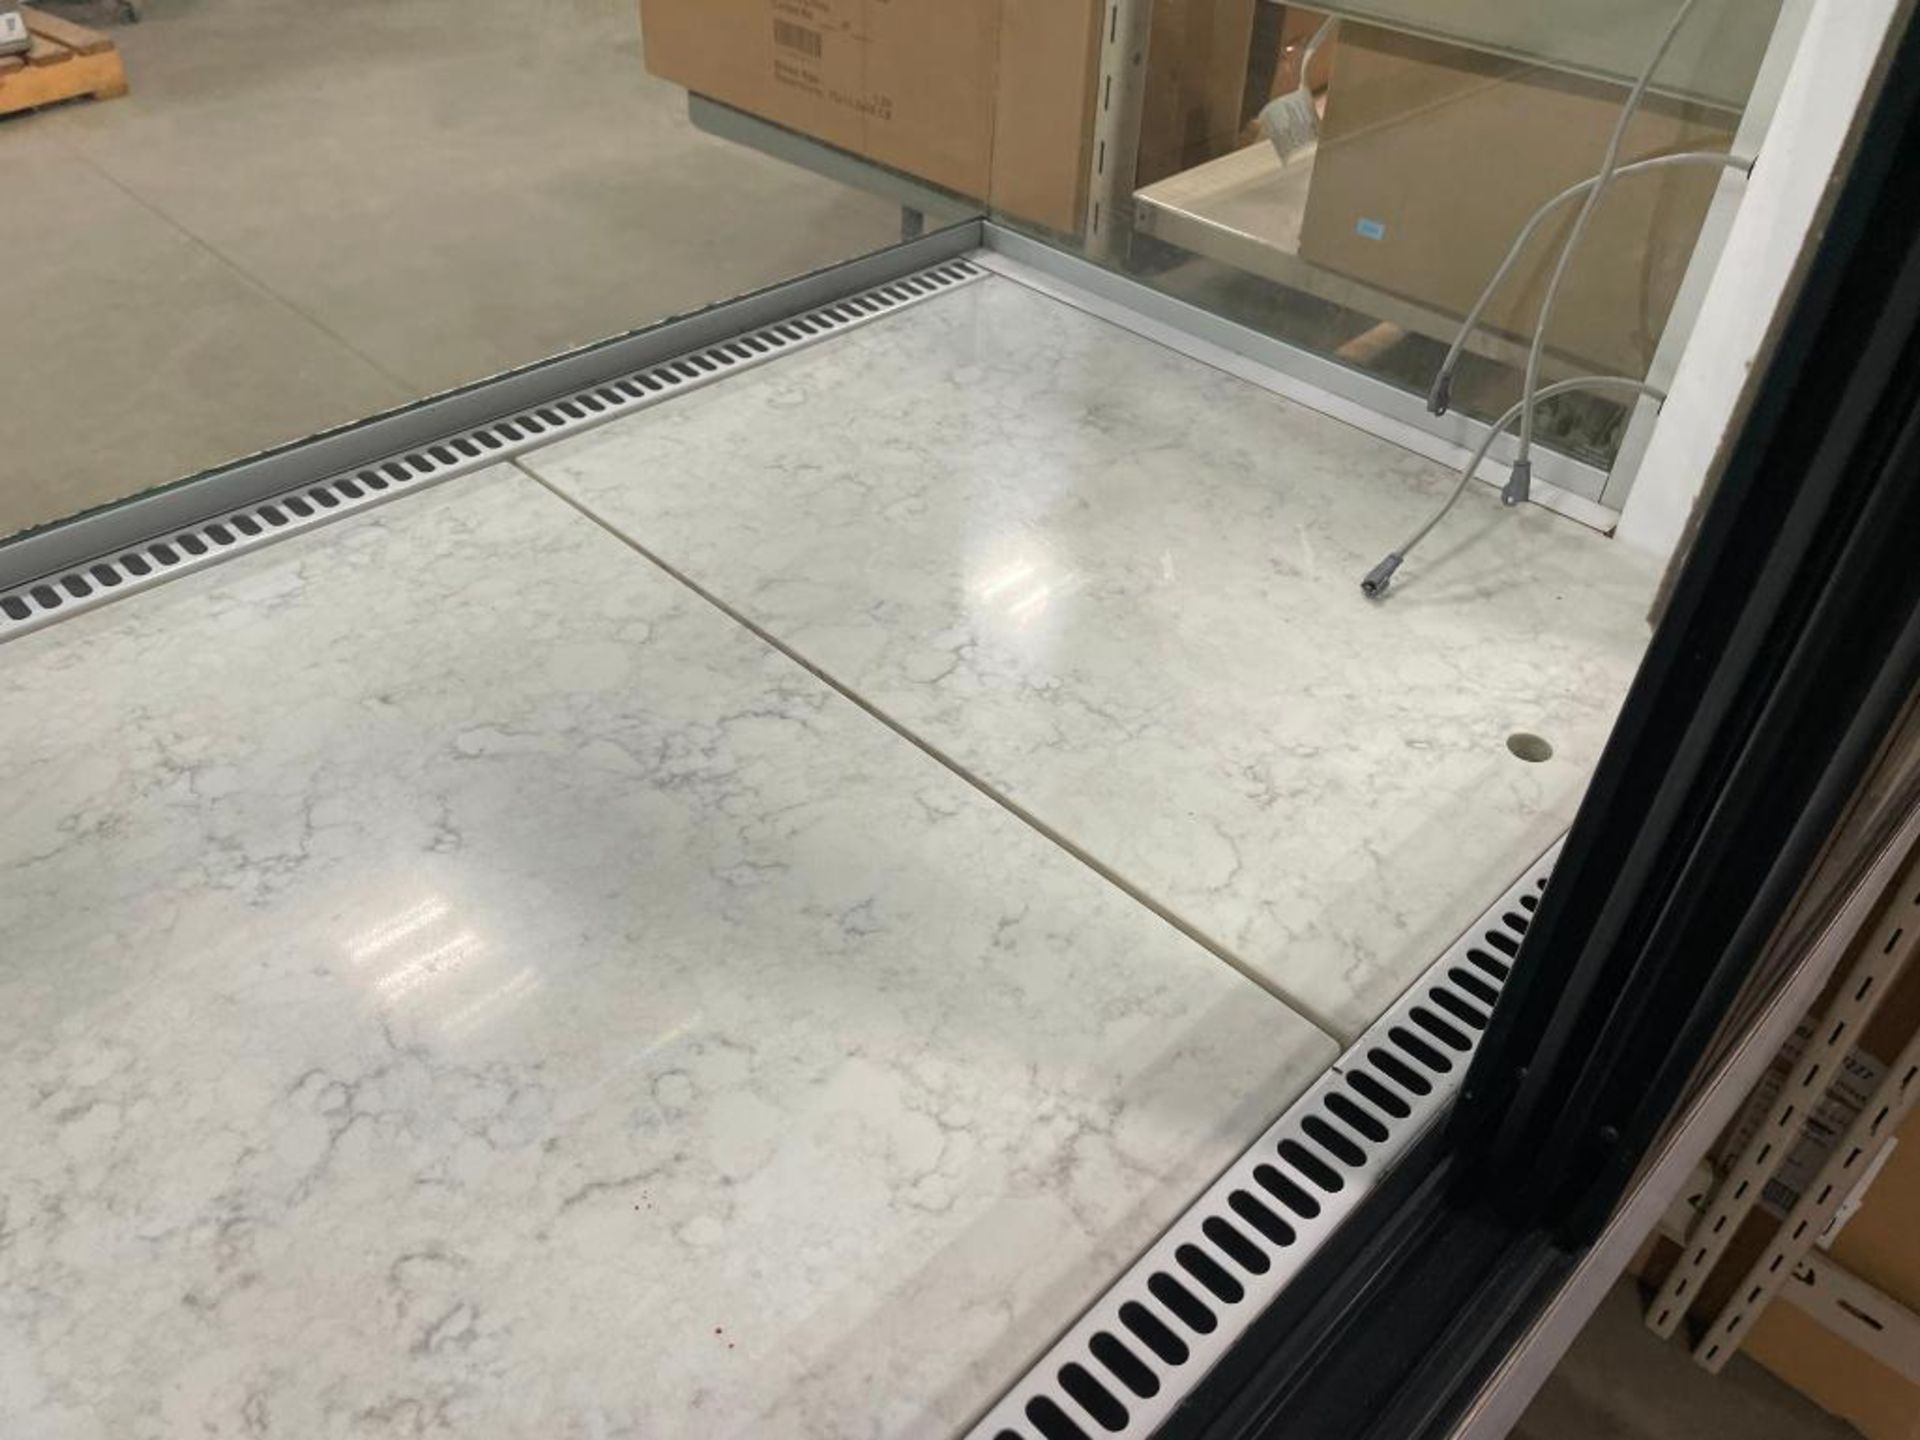 CANADIAN DISPLAY SYSTEMS SQRD6 72" REFRIGERATED DISPLAY CASE - Image 20 of 23